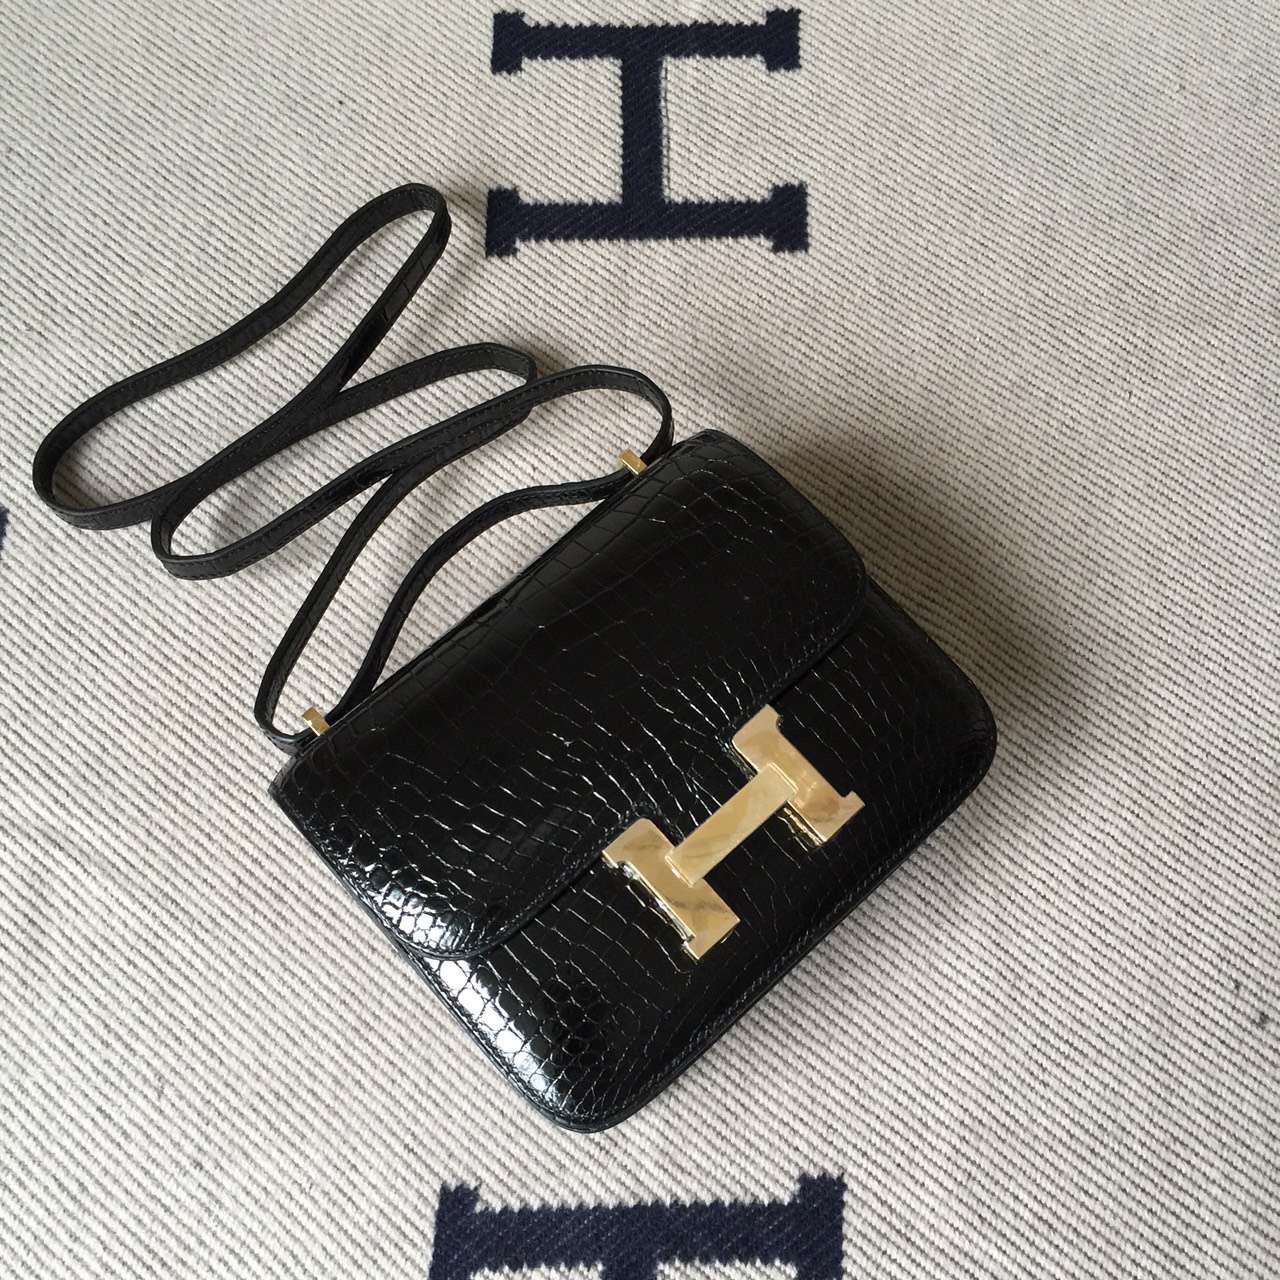 Hand Stitching Hermes Crocodile Leather Constance Bag19cm in CK89 Black